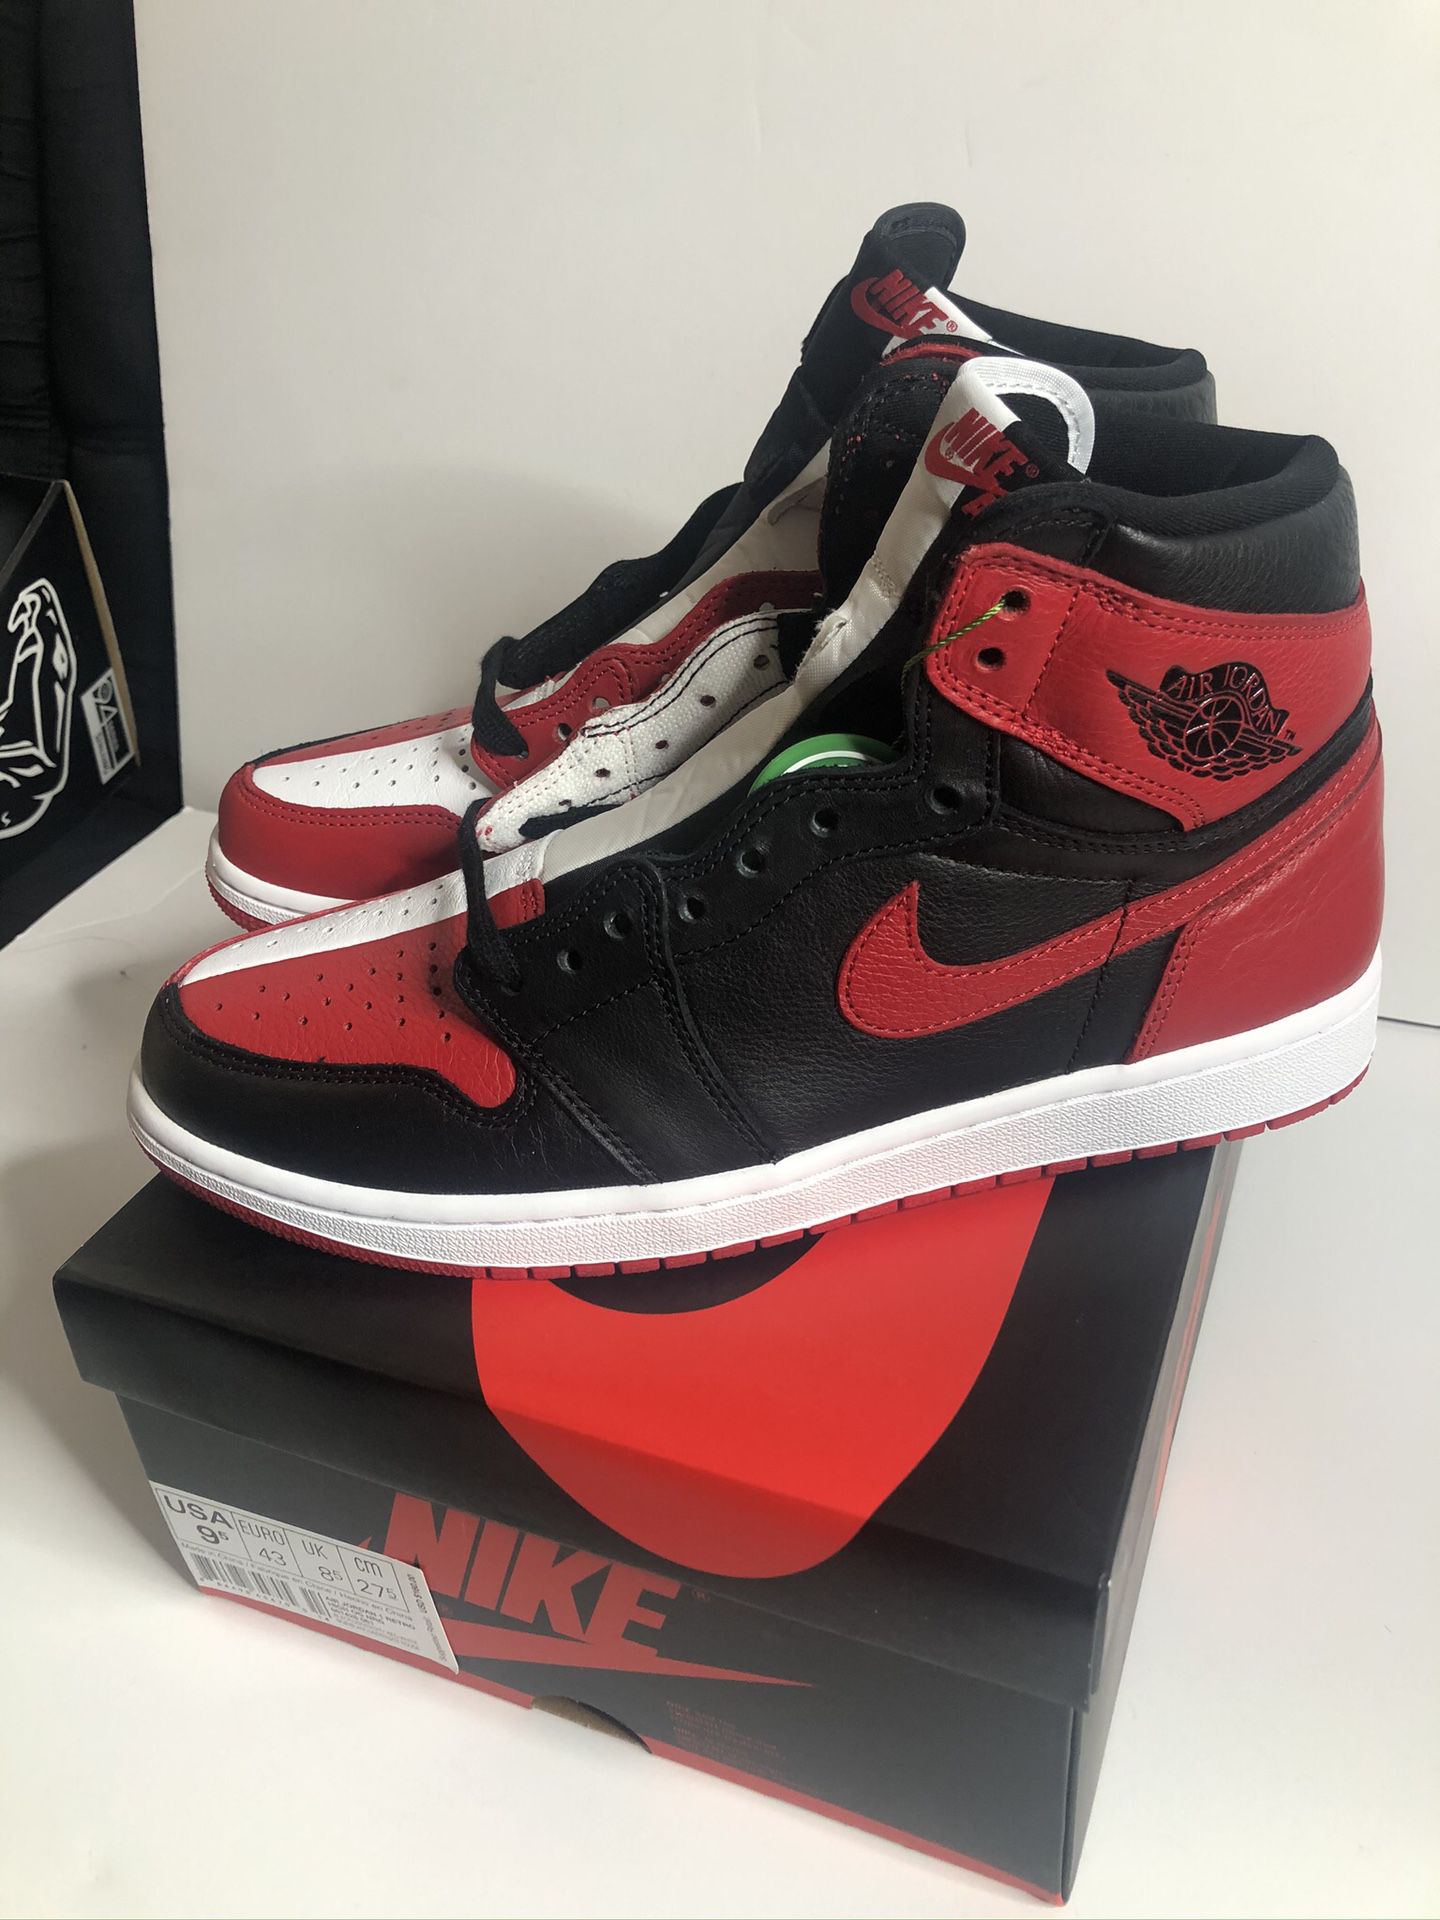 Nike air Jordan 1 homage to home size 9.5 ds